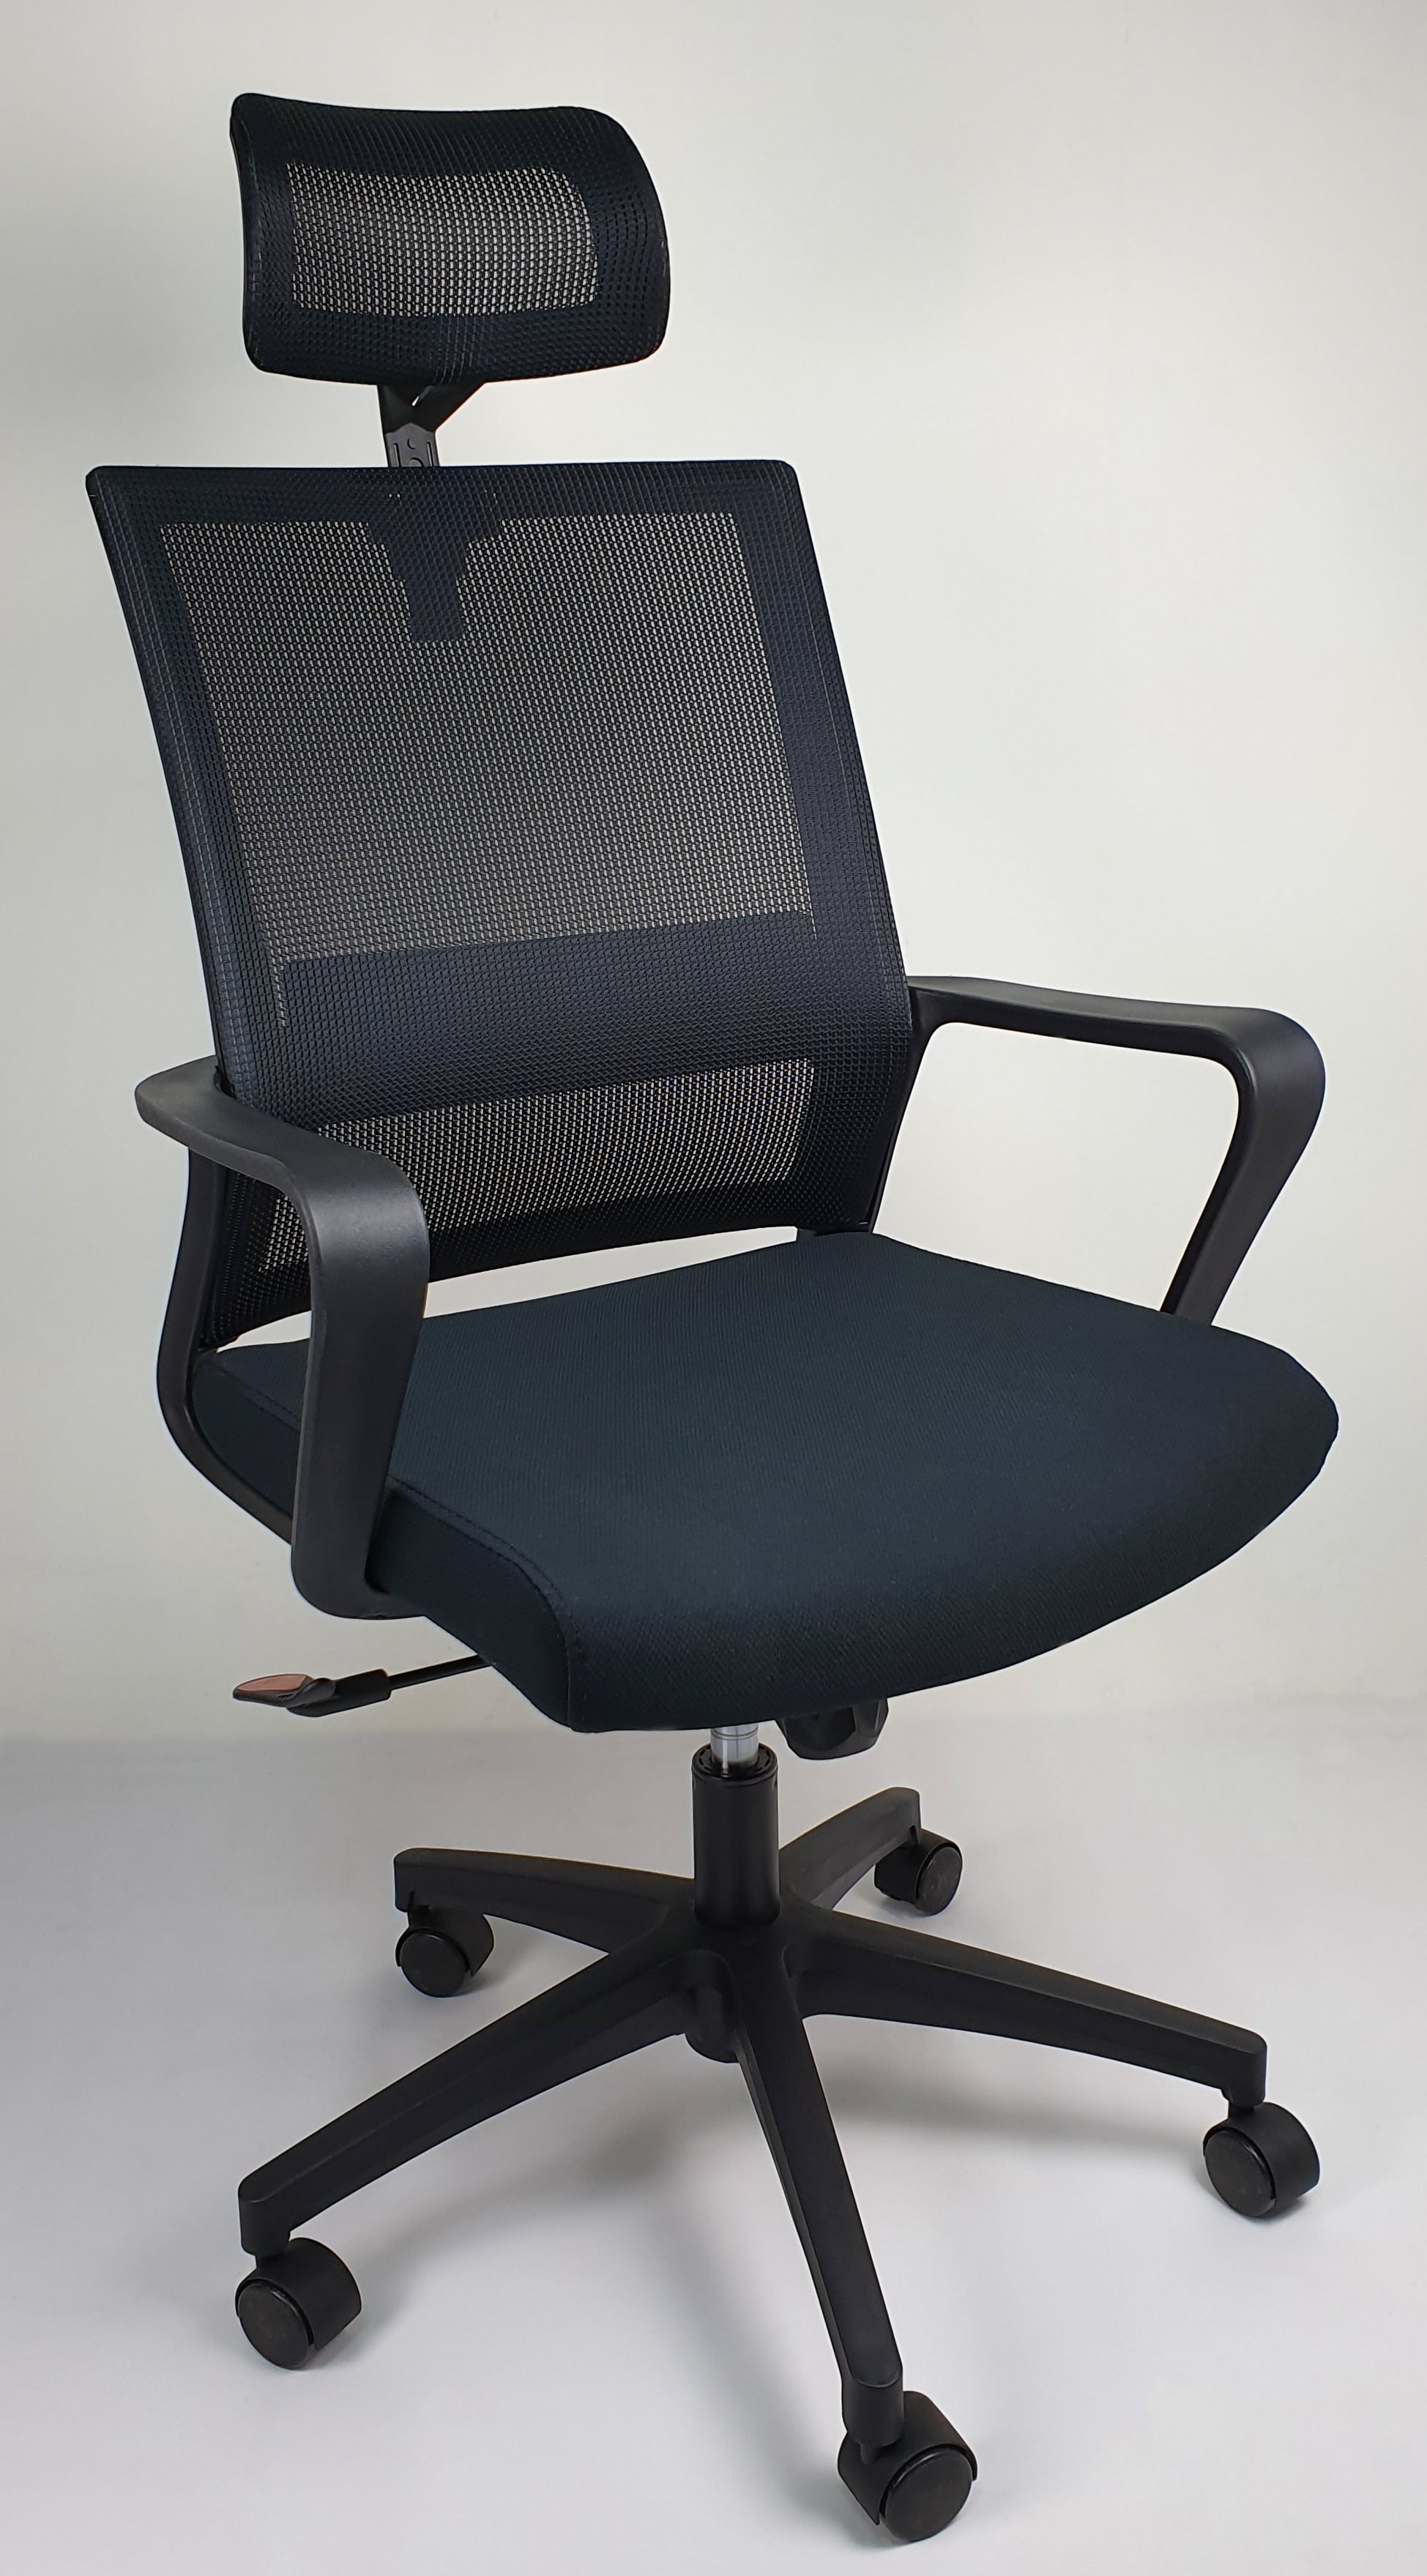 CHA-HB-307A Mesh Office Chair with Headrest